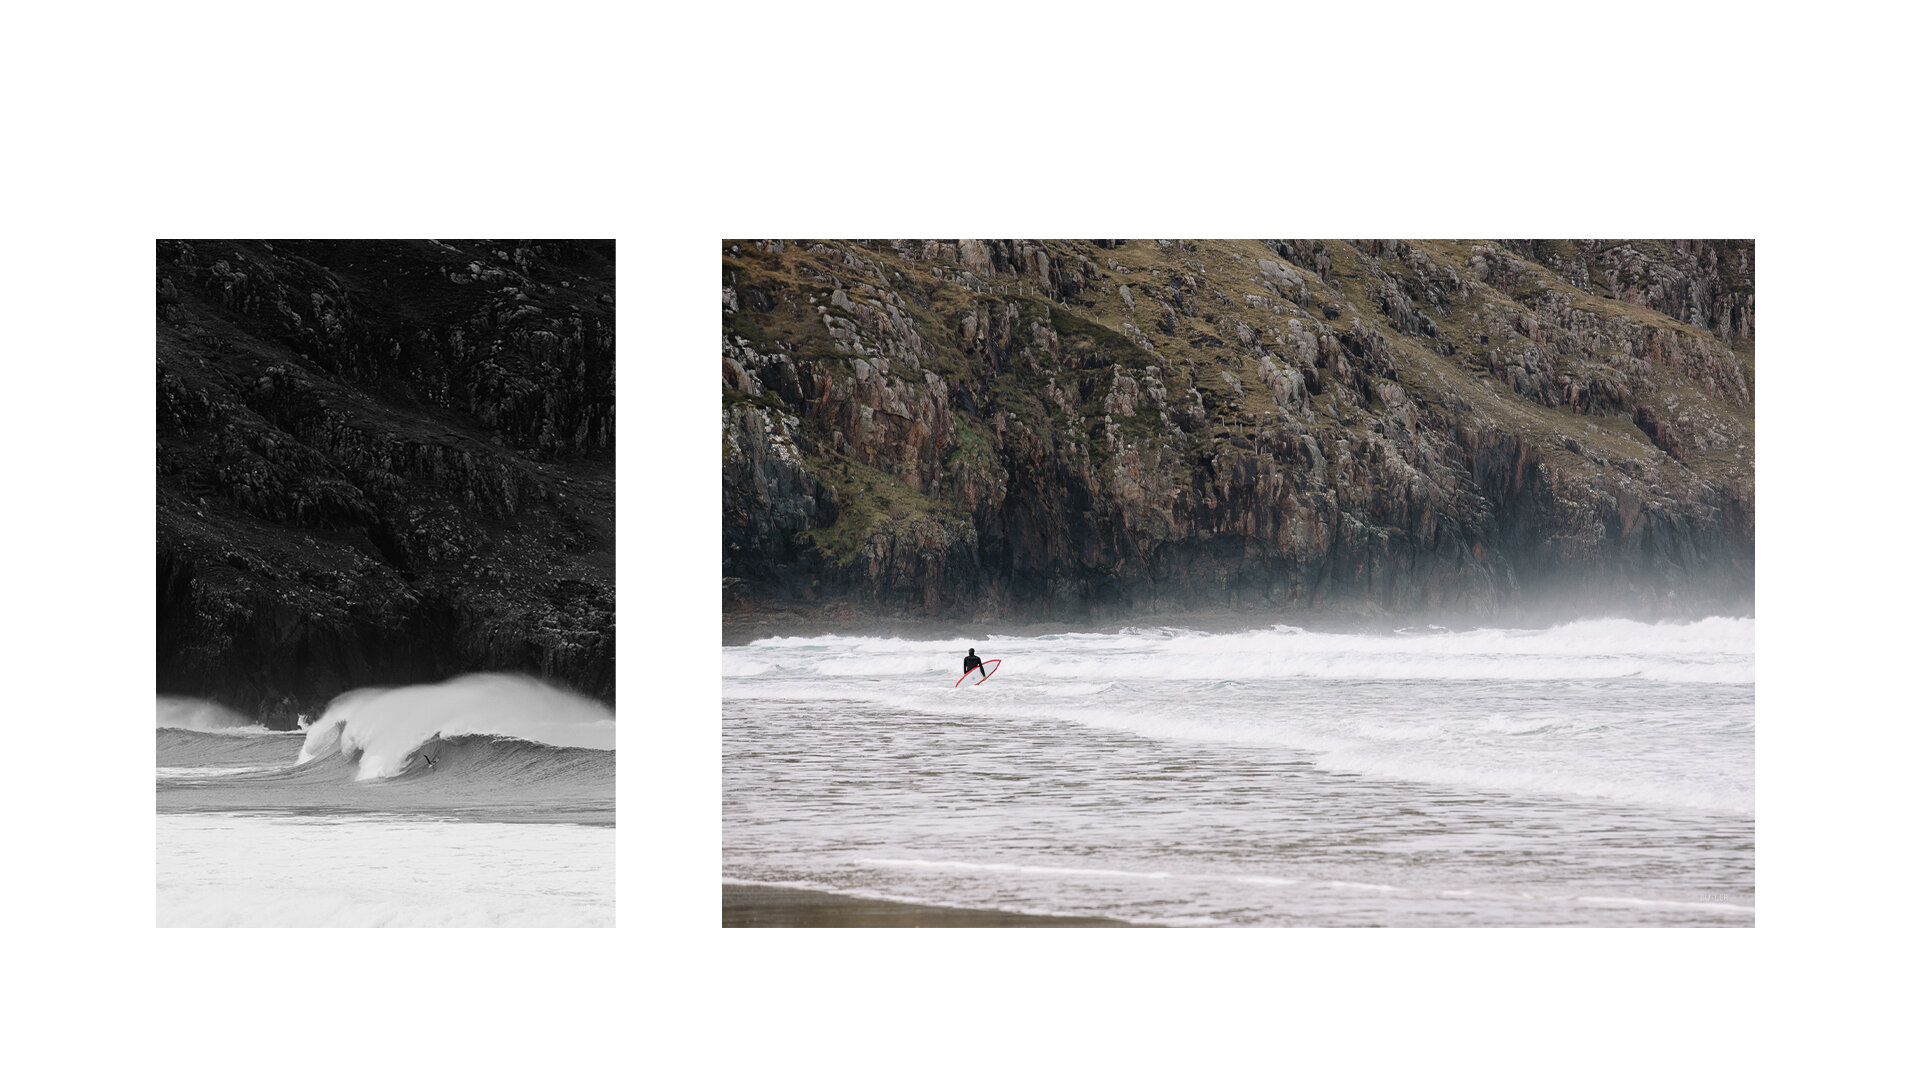 toby-butler-photographer-photography-scotland-surfing-surf-landscape-travelmikelay-mike-lay-hebrides-colinmacleod-musician-island-longboarder-photographer-ocean-north-photo-surfer-earth-climate-wild-15.jpg